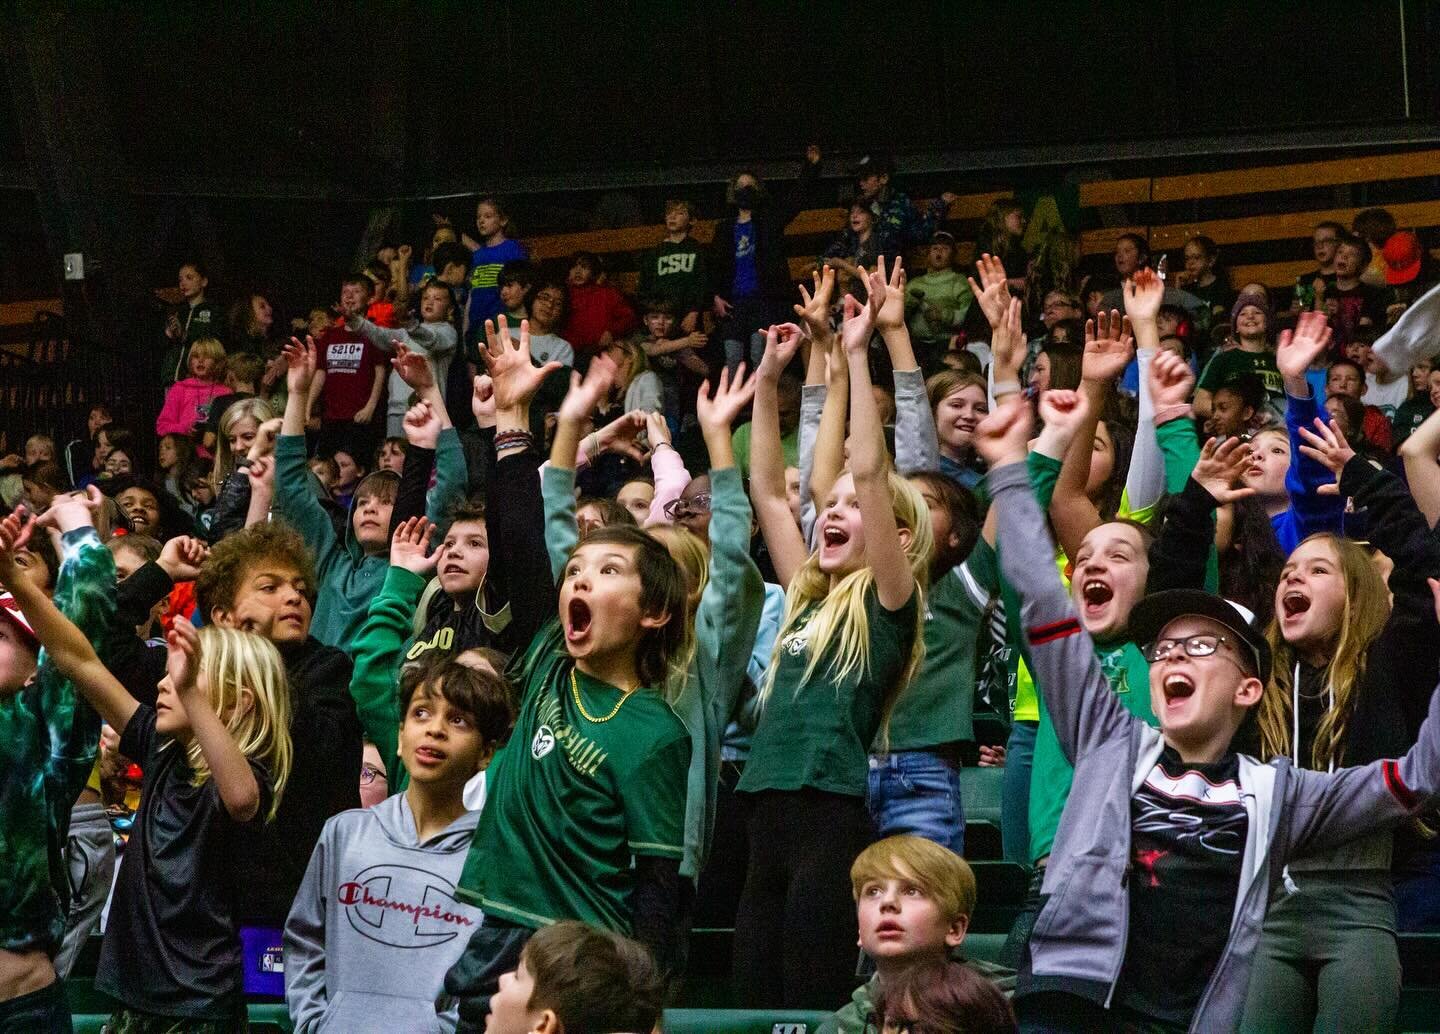 This first photo is probably one of my favorite photos I&rsquo;ve ever taken! The joy and excitement on these kids&rsquo; faces is contagious!

Moby Arena hosted a crowd of over 6,000 elementary student as a part of Colorado State University&rsquo;s 